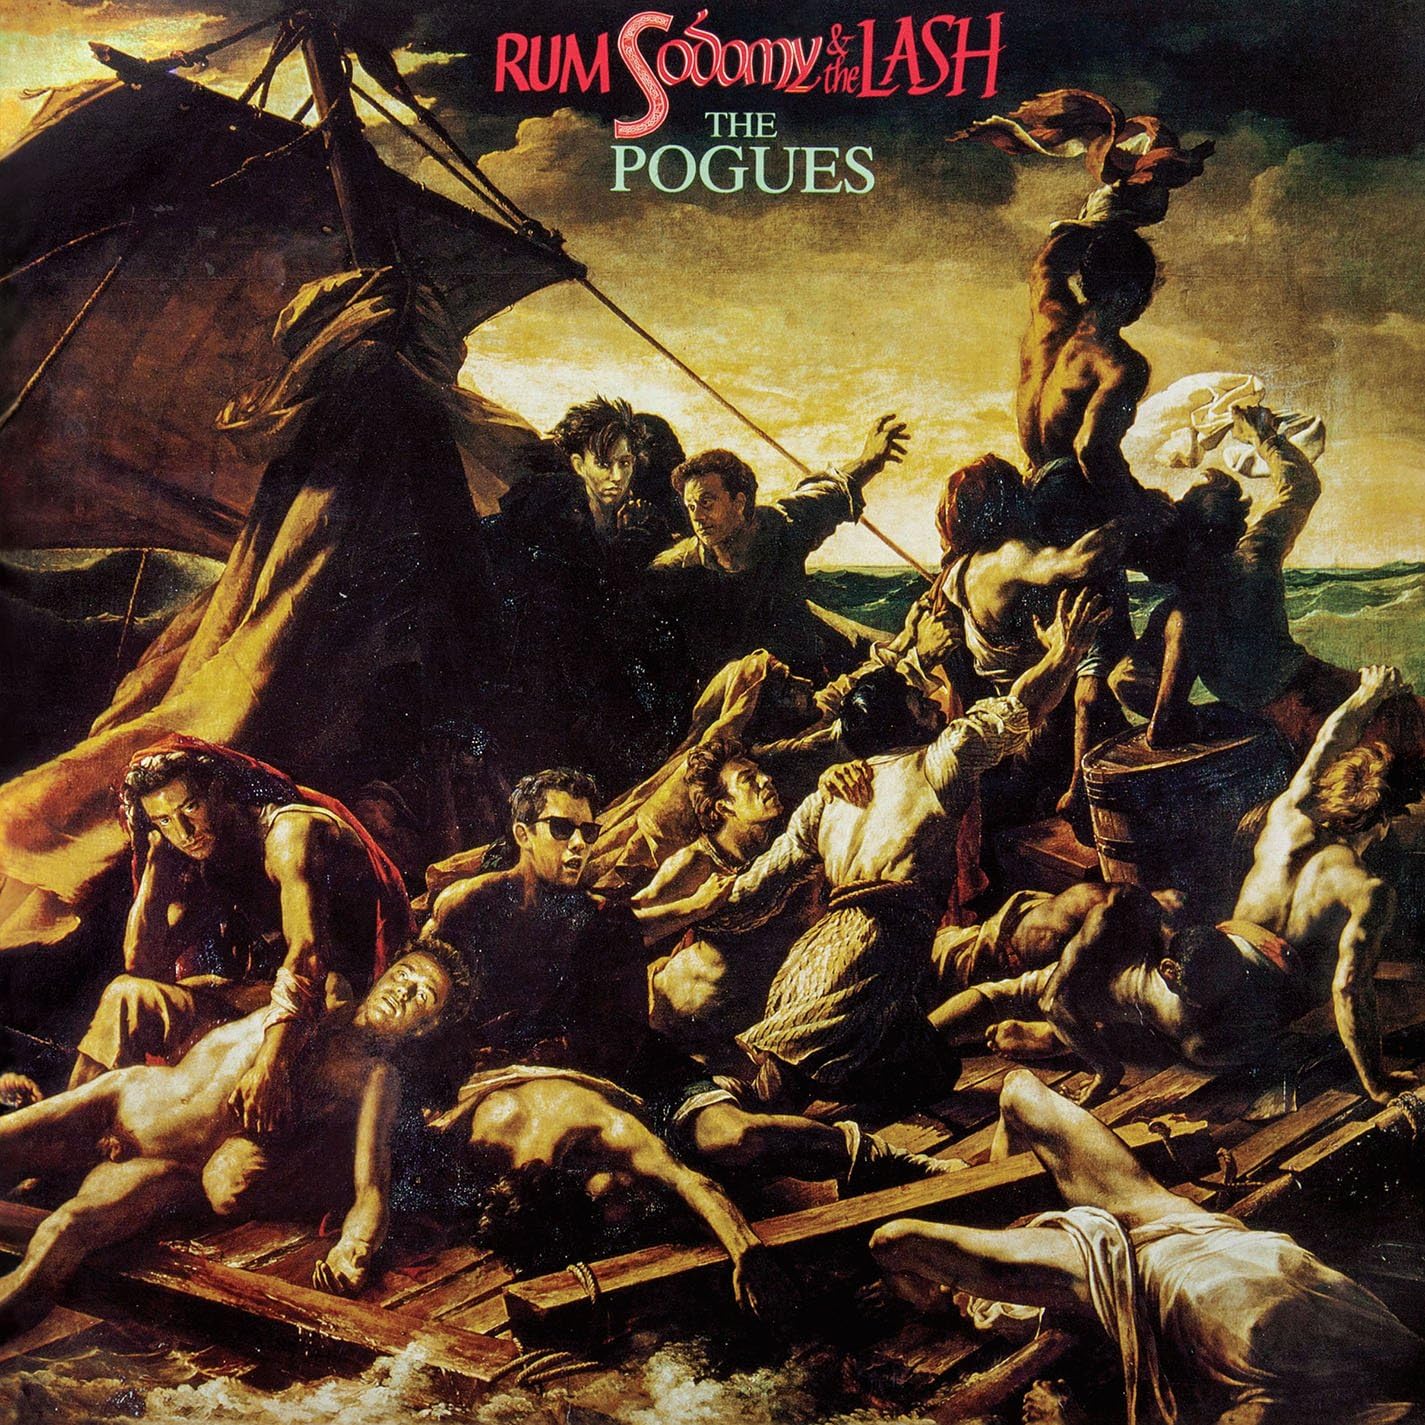 LP - The Pogues - Rum, Sodomy & the Lash